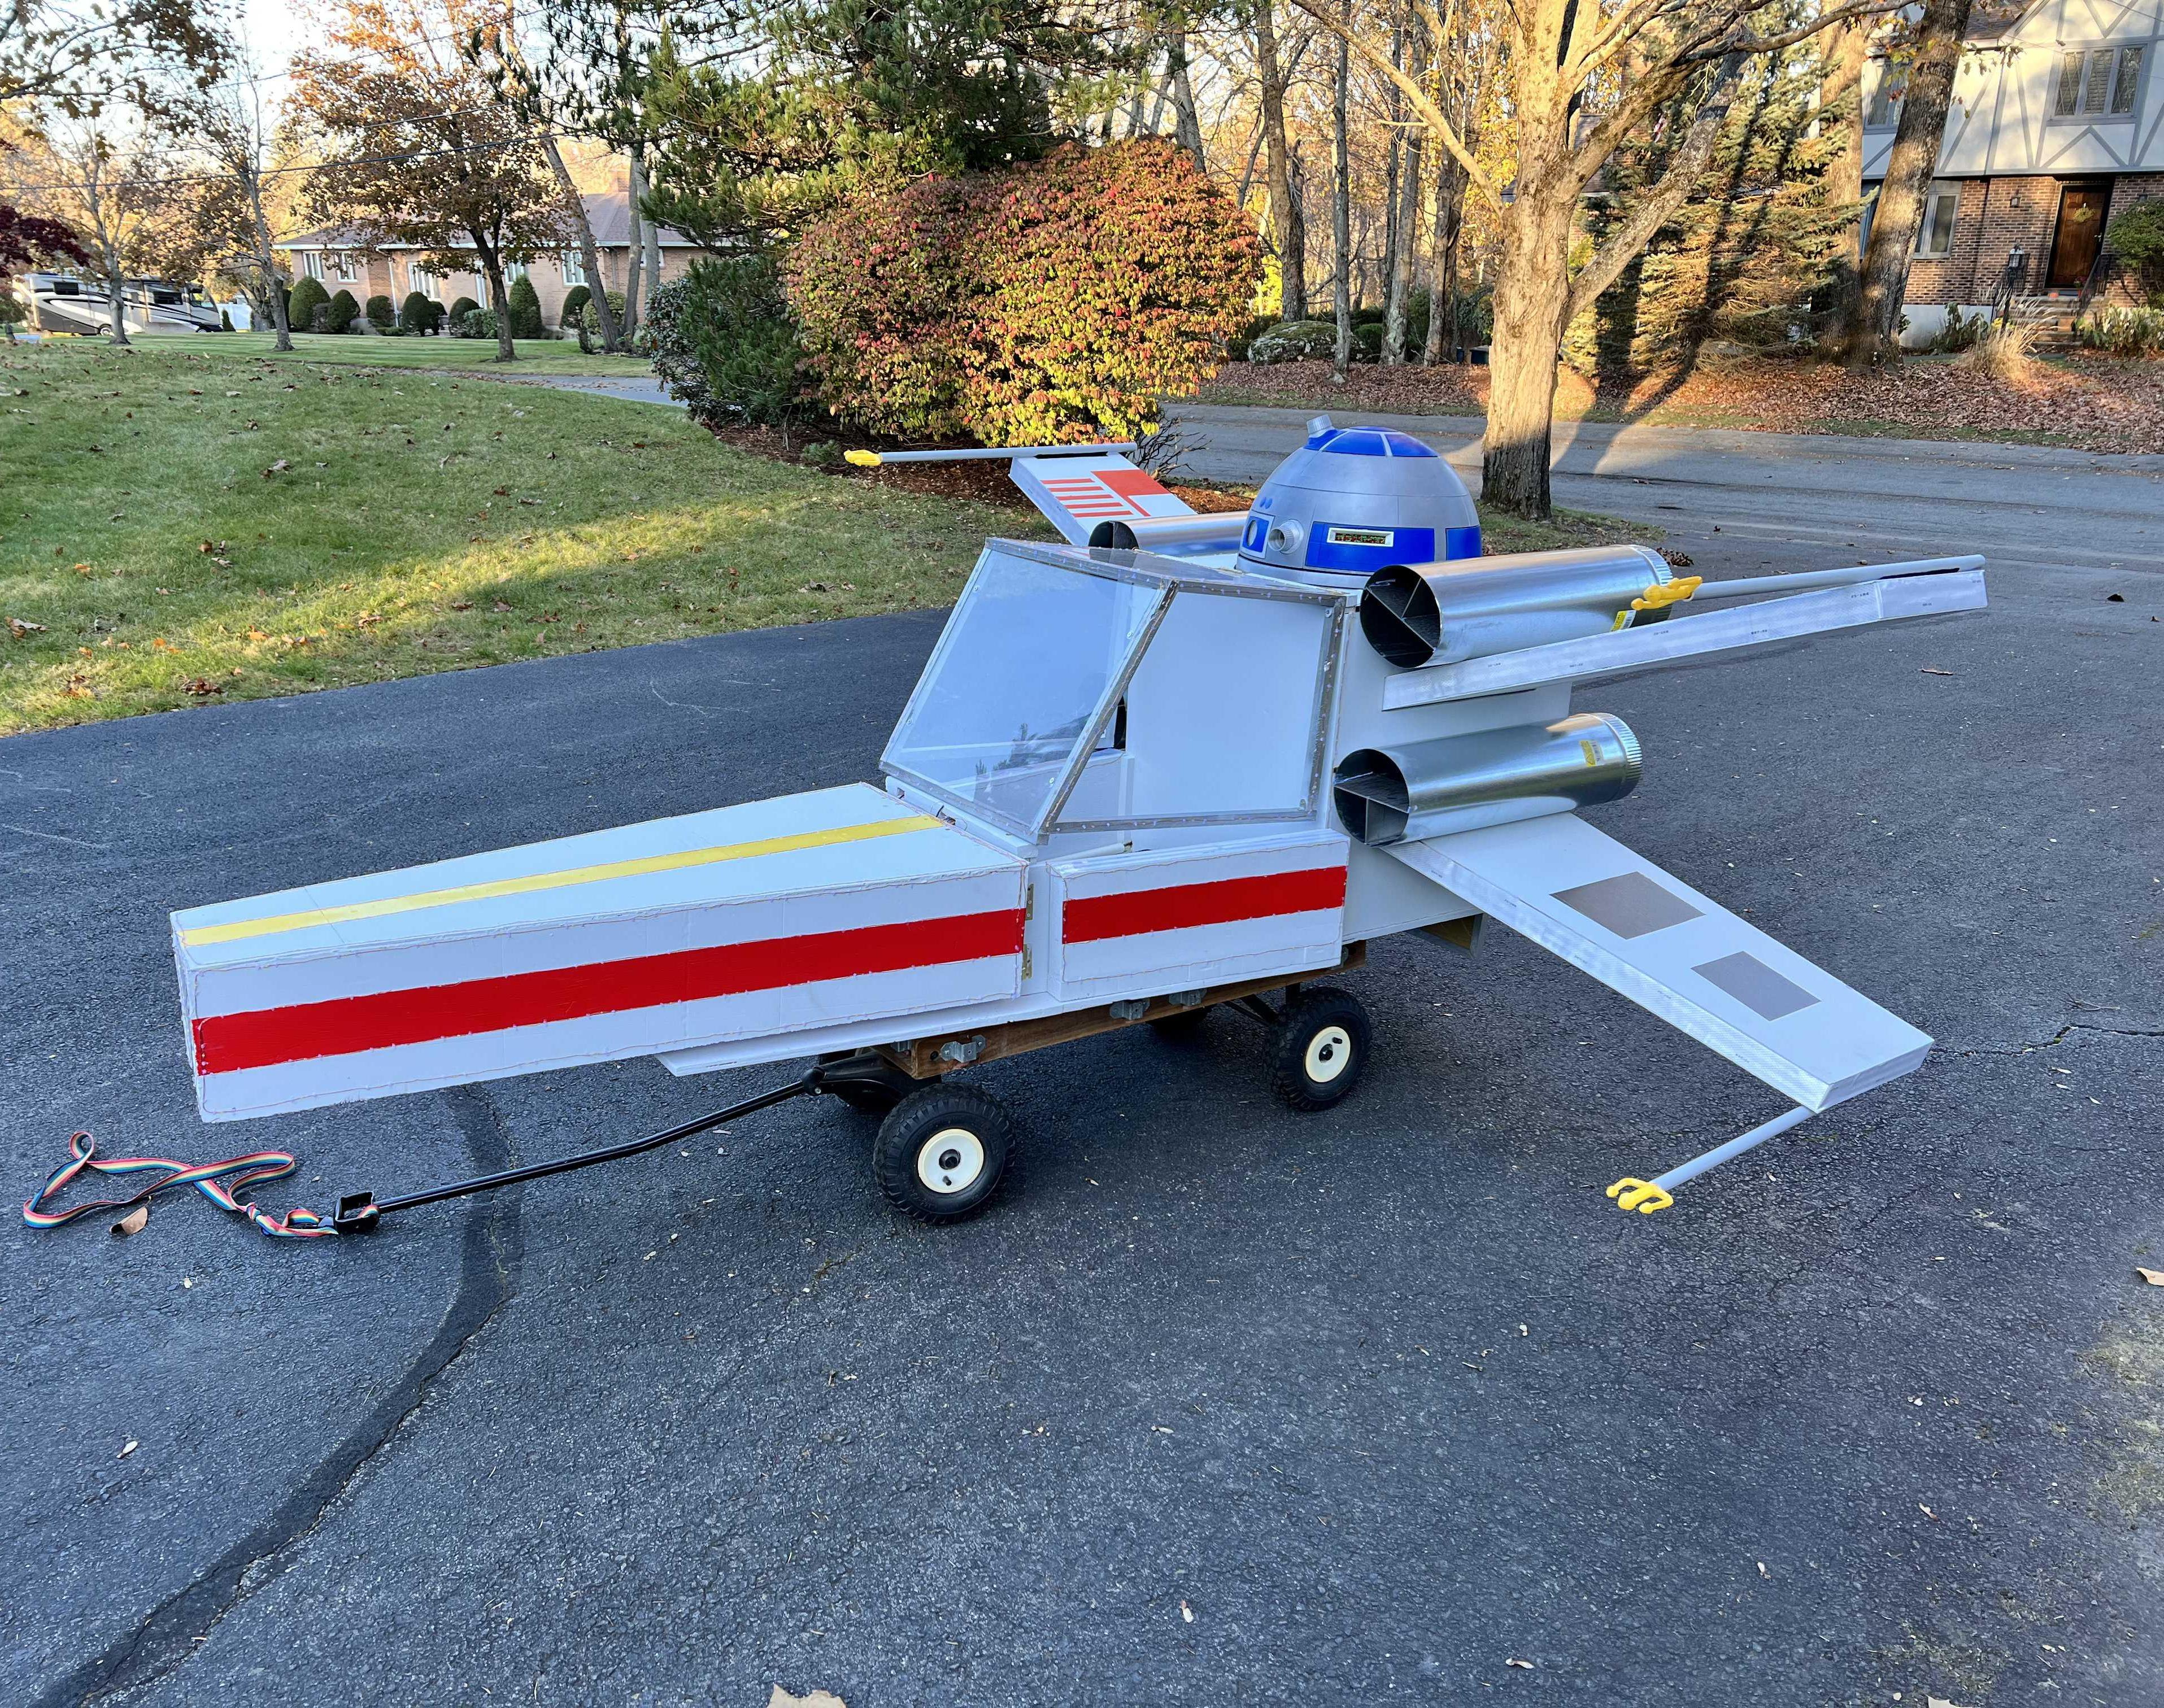 Halloween Star Wars X-Wing With Operational R2-D2